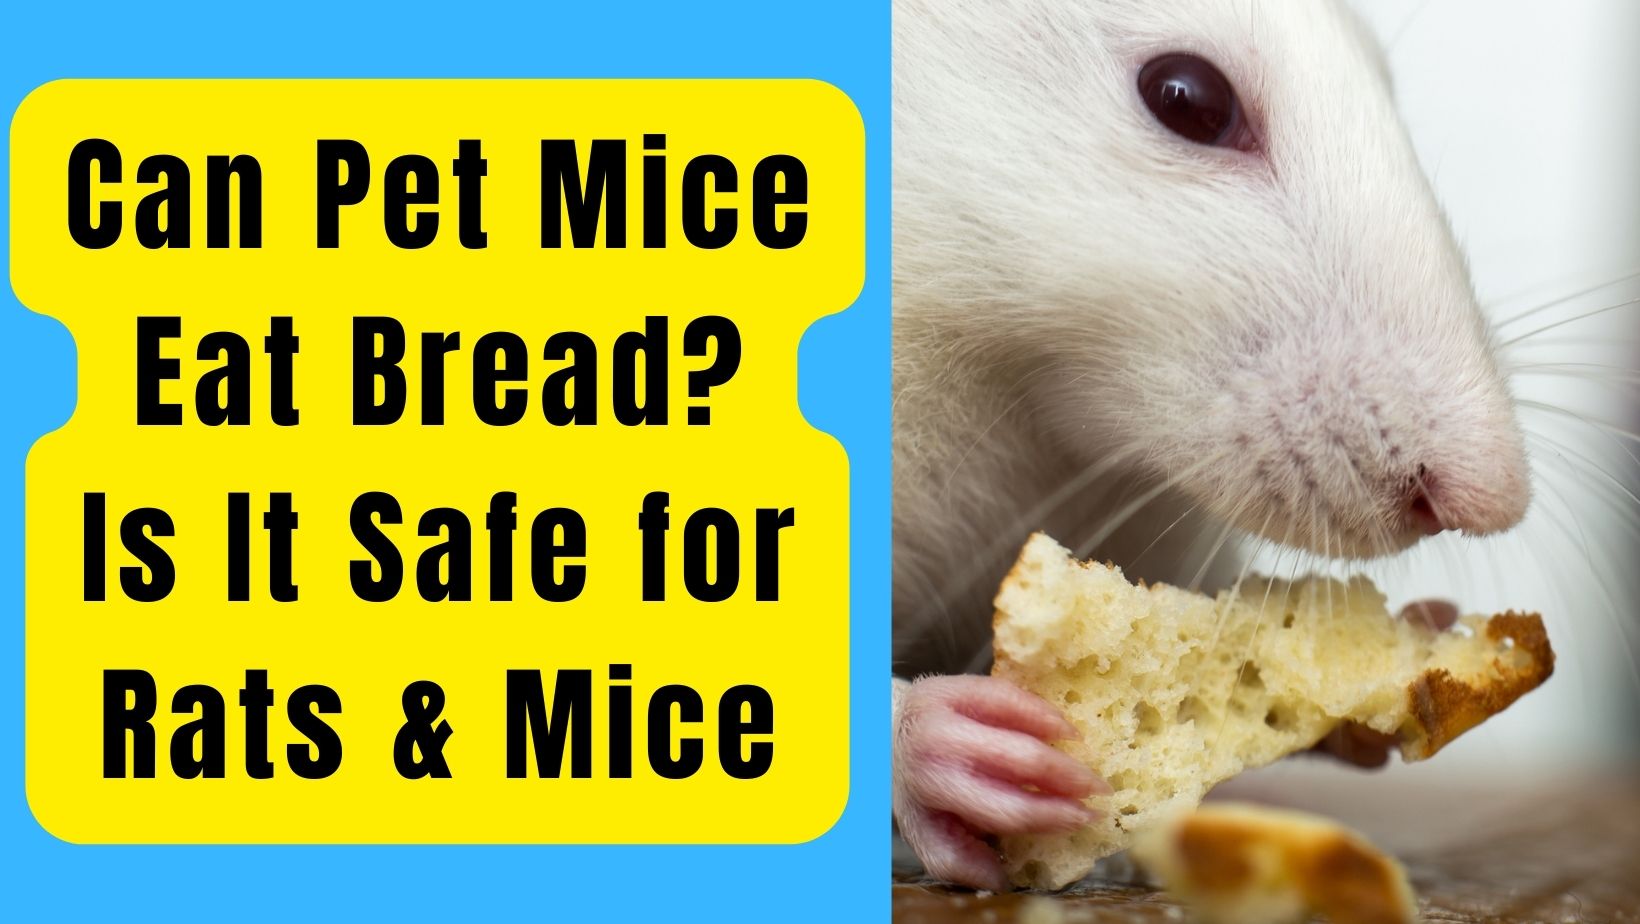 Can Pet Mice Eat Bread? Is Safe for Them?